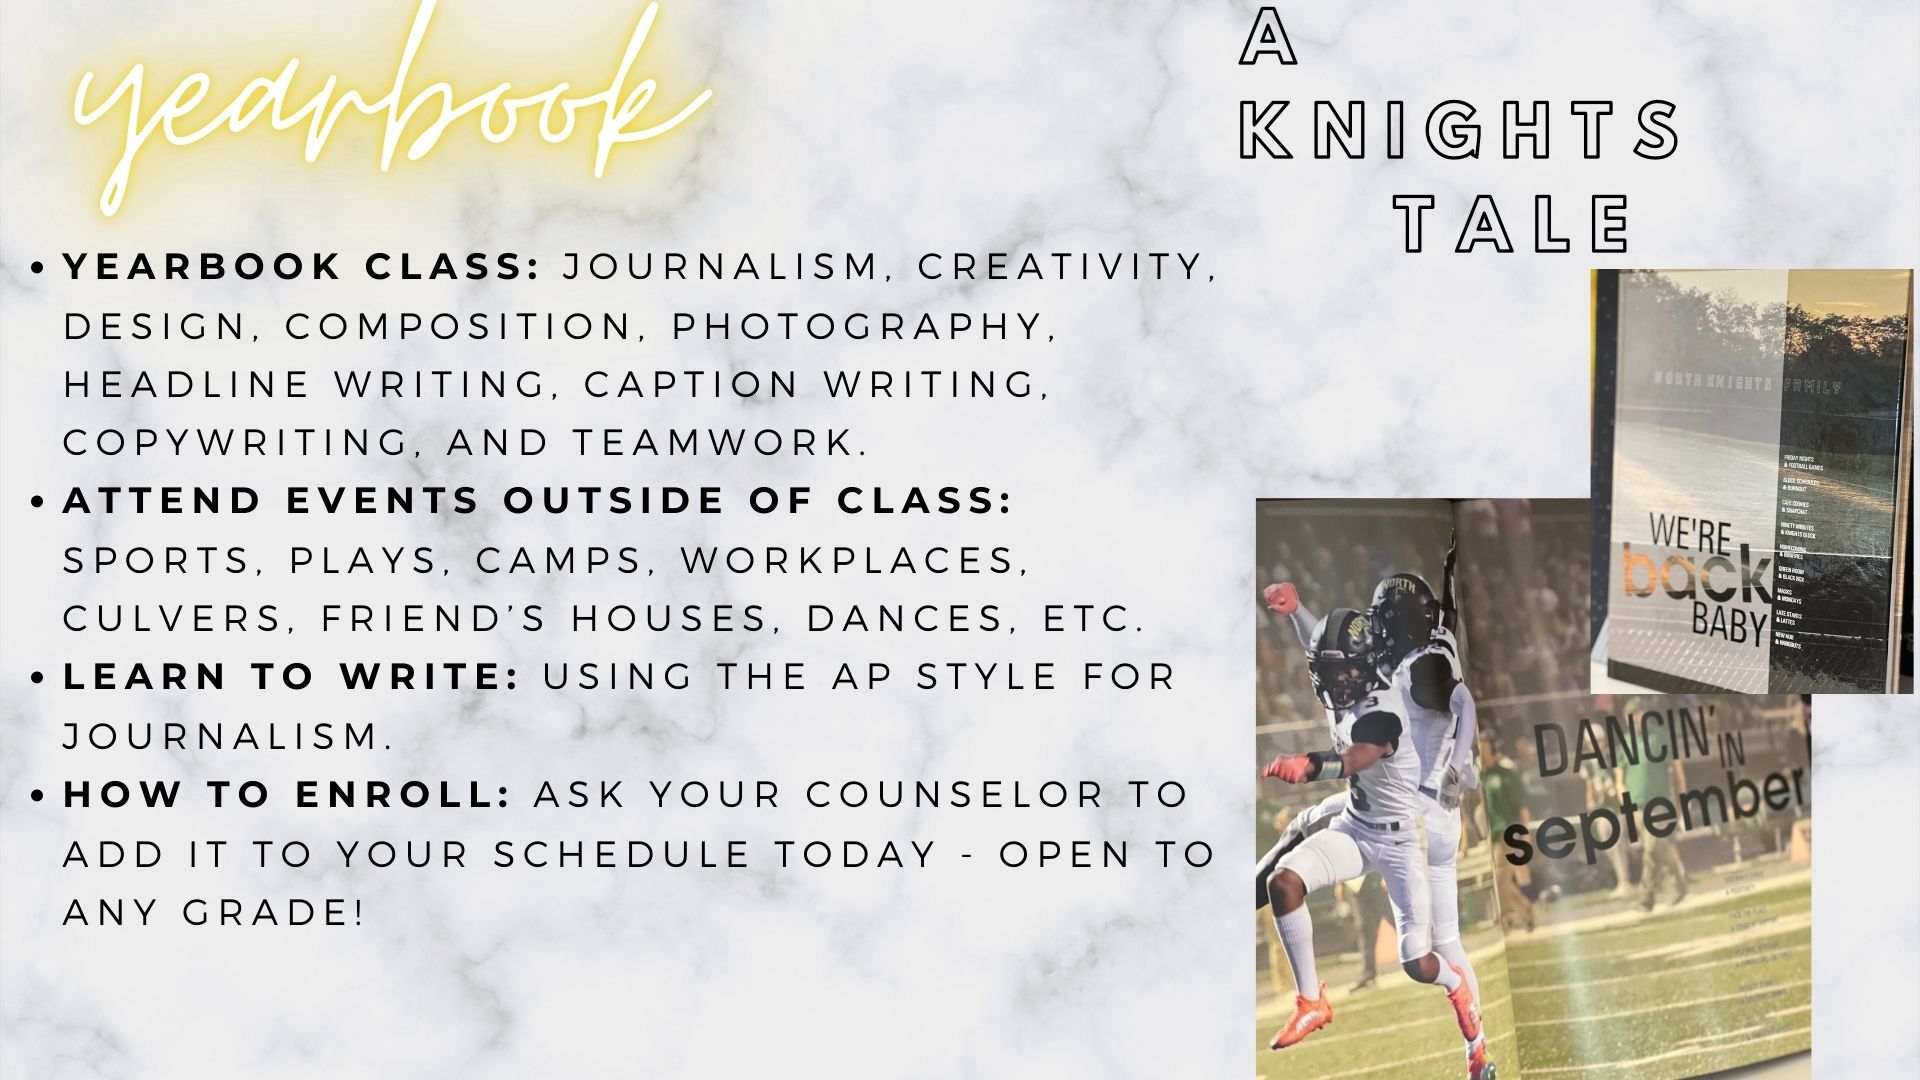 Yearbook Course Information